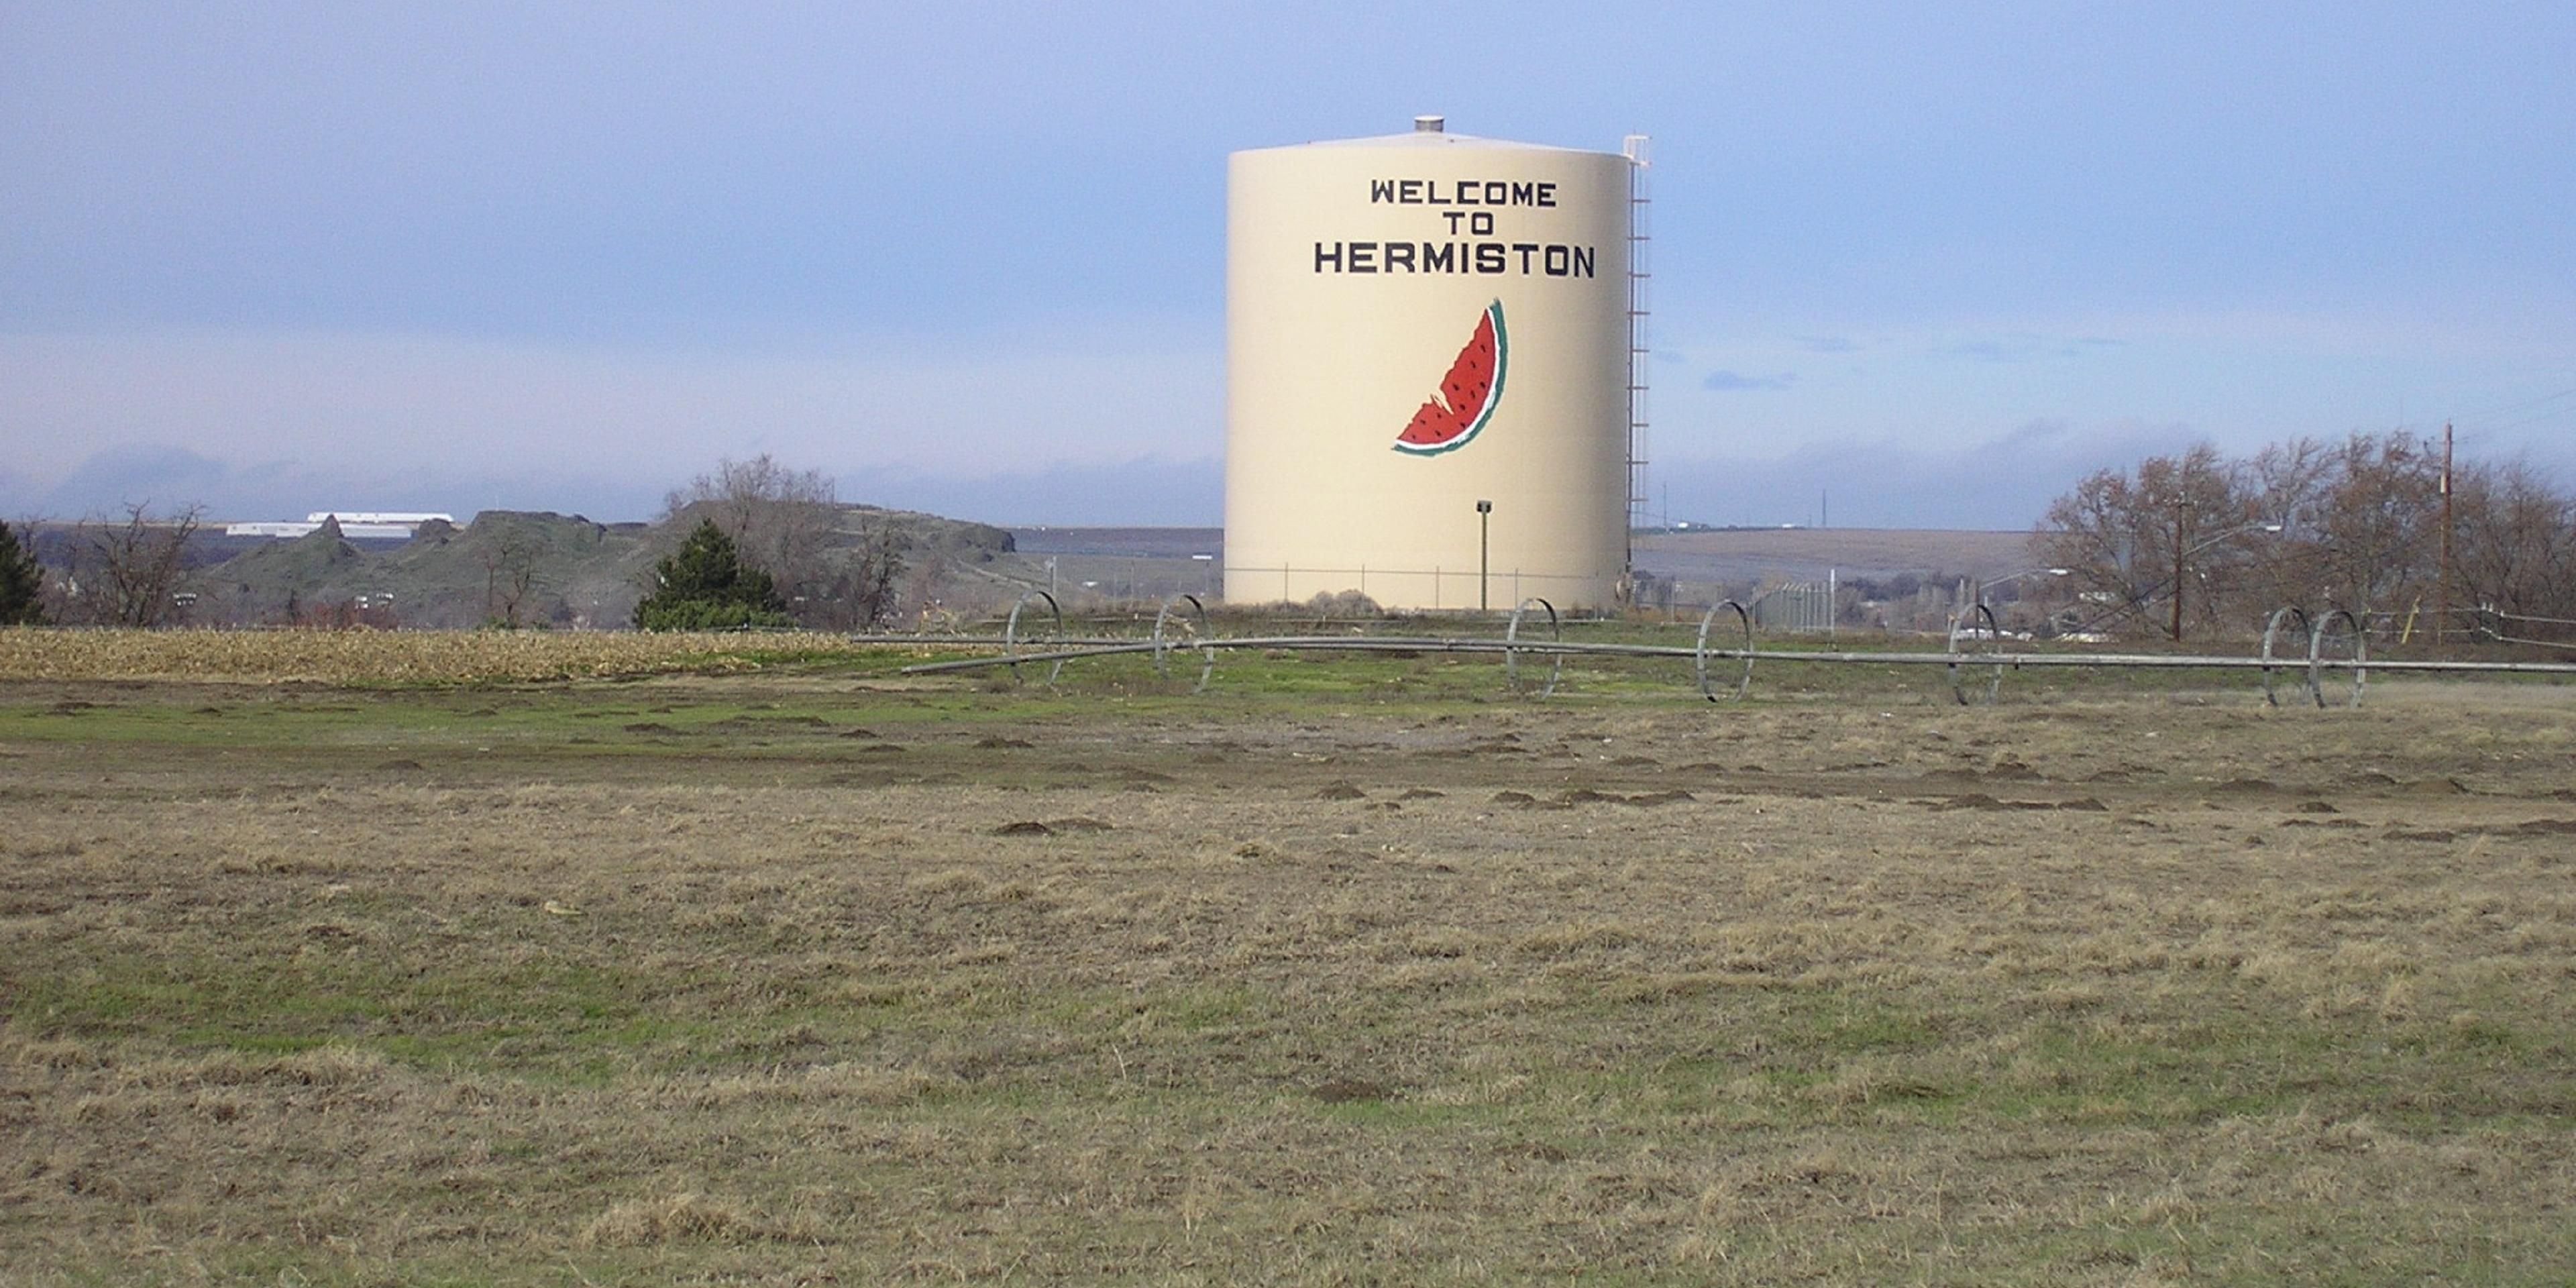 During your trip to Hermiston, take a stroll through our beautiful Downtown area. Find great restaurants, shops, and much more during your stay.